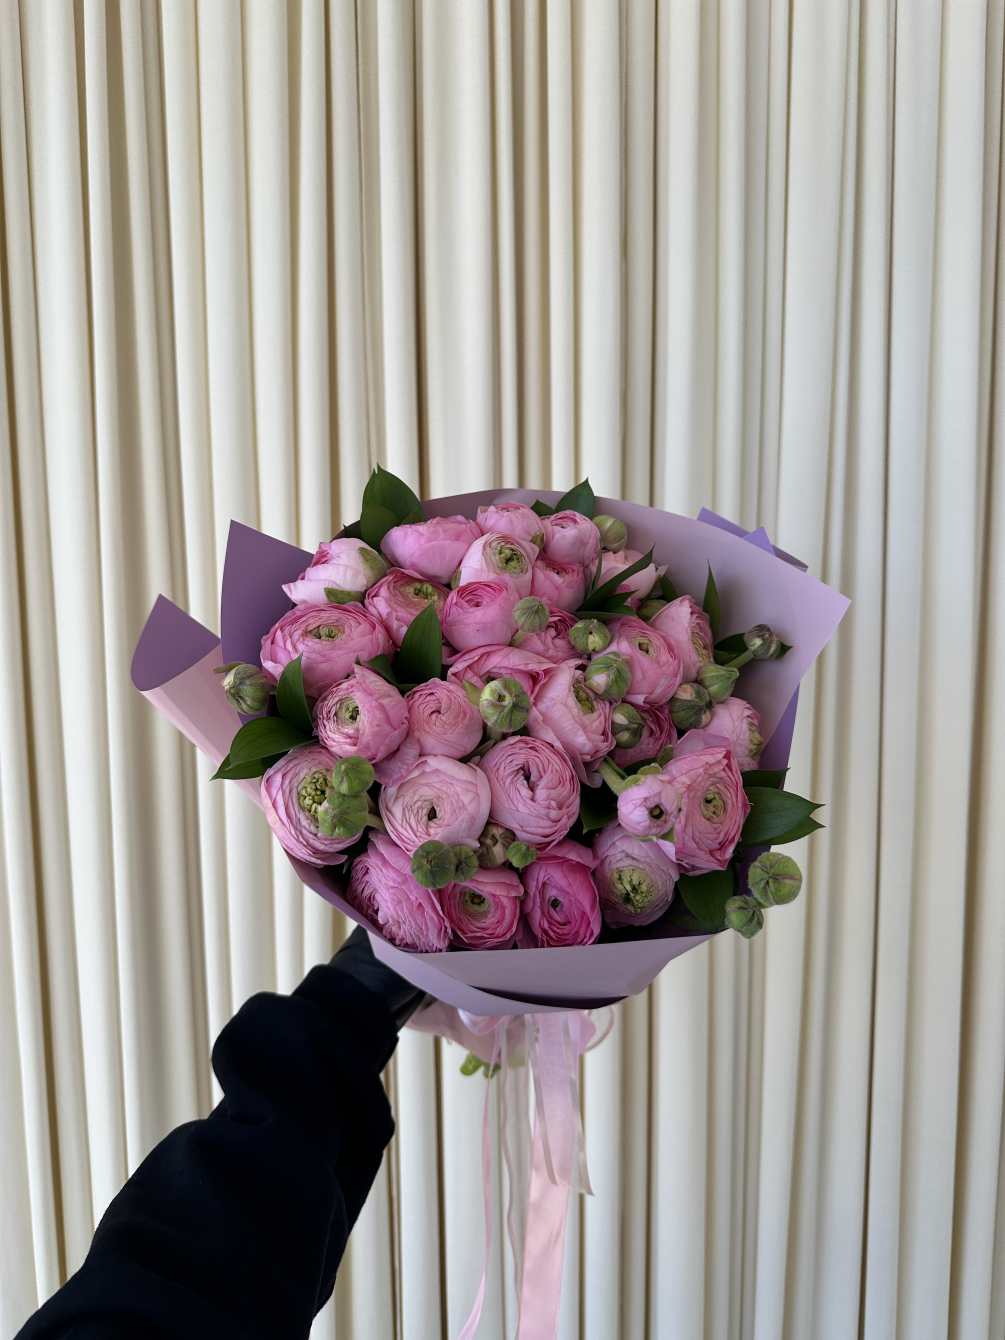 Keep it simple and sweet with this lovely collection of pink ranunculus